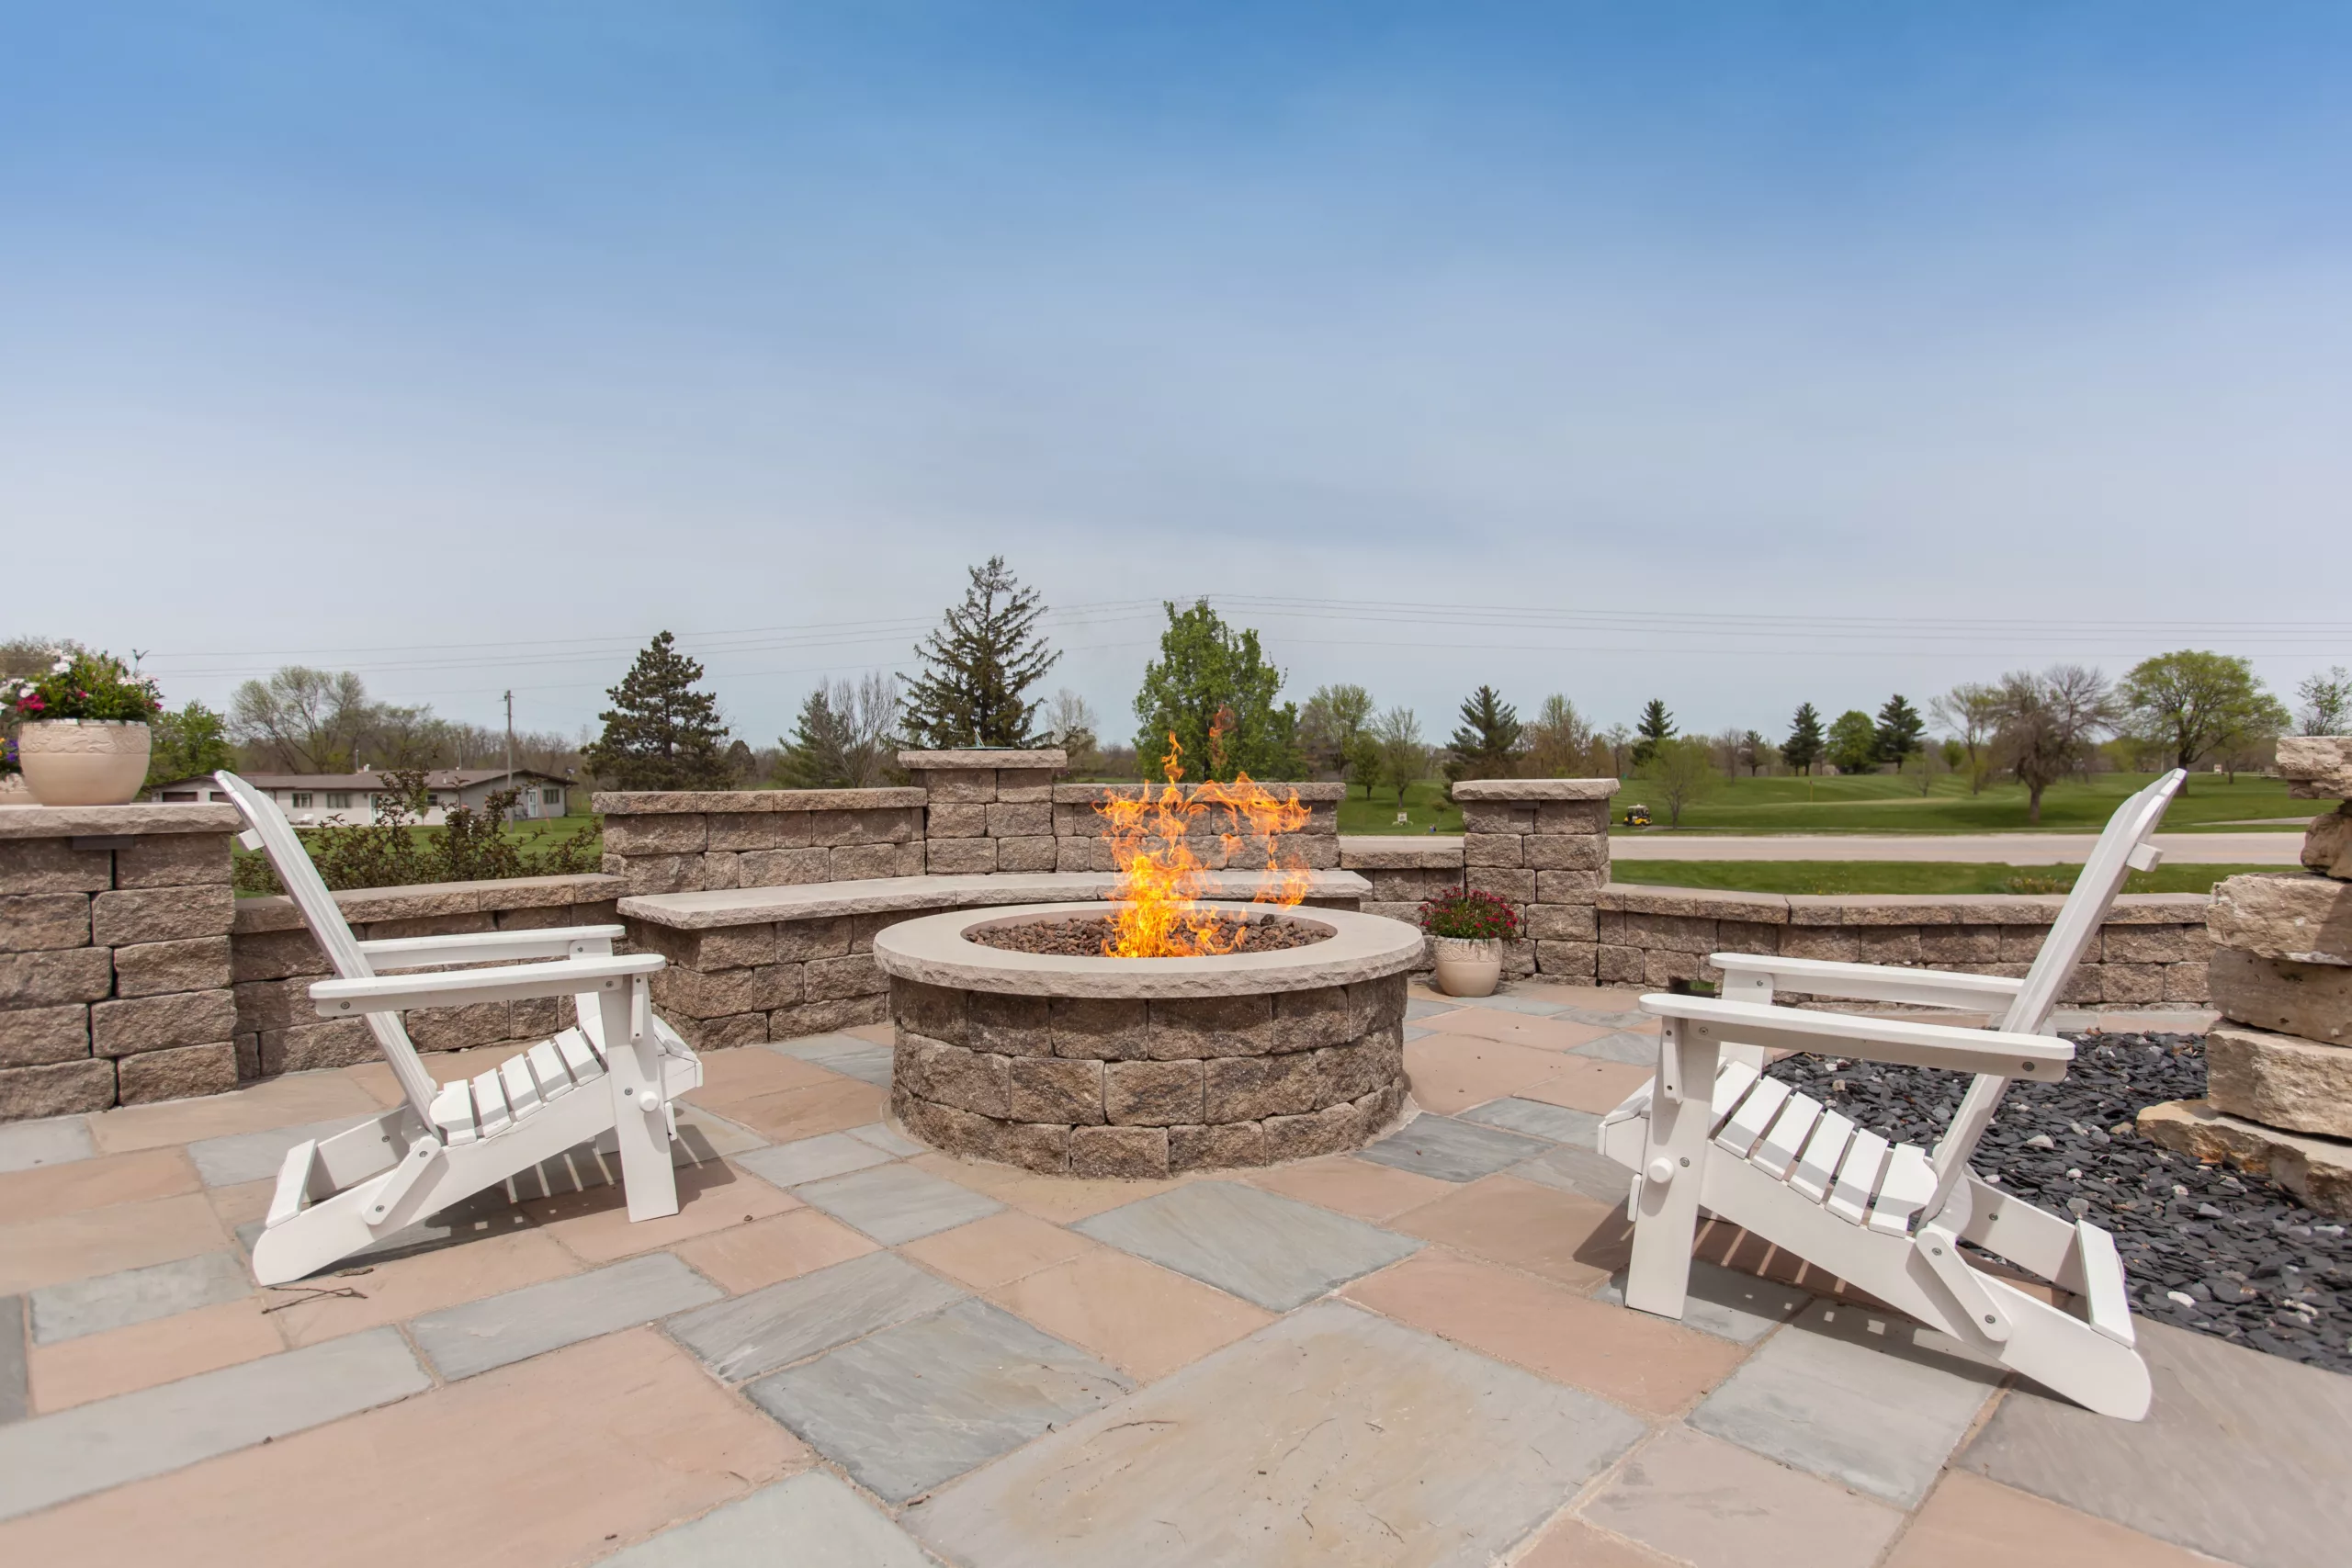 Building an Outdoor fireplace or firepit out of stone to relax in front of on a cool summer’s night